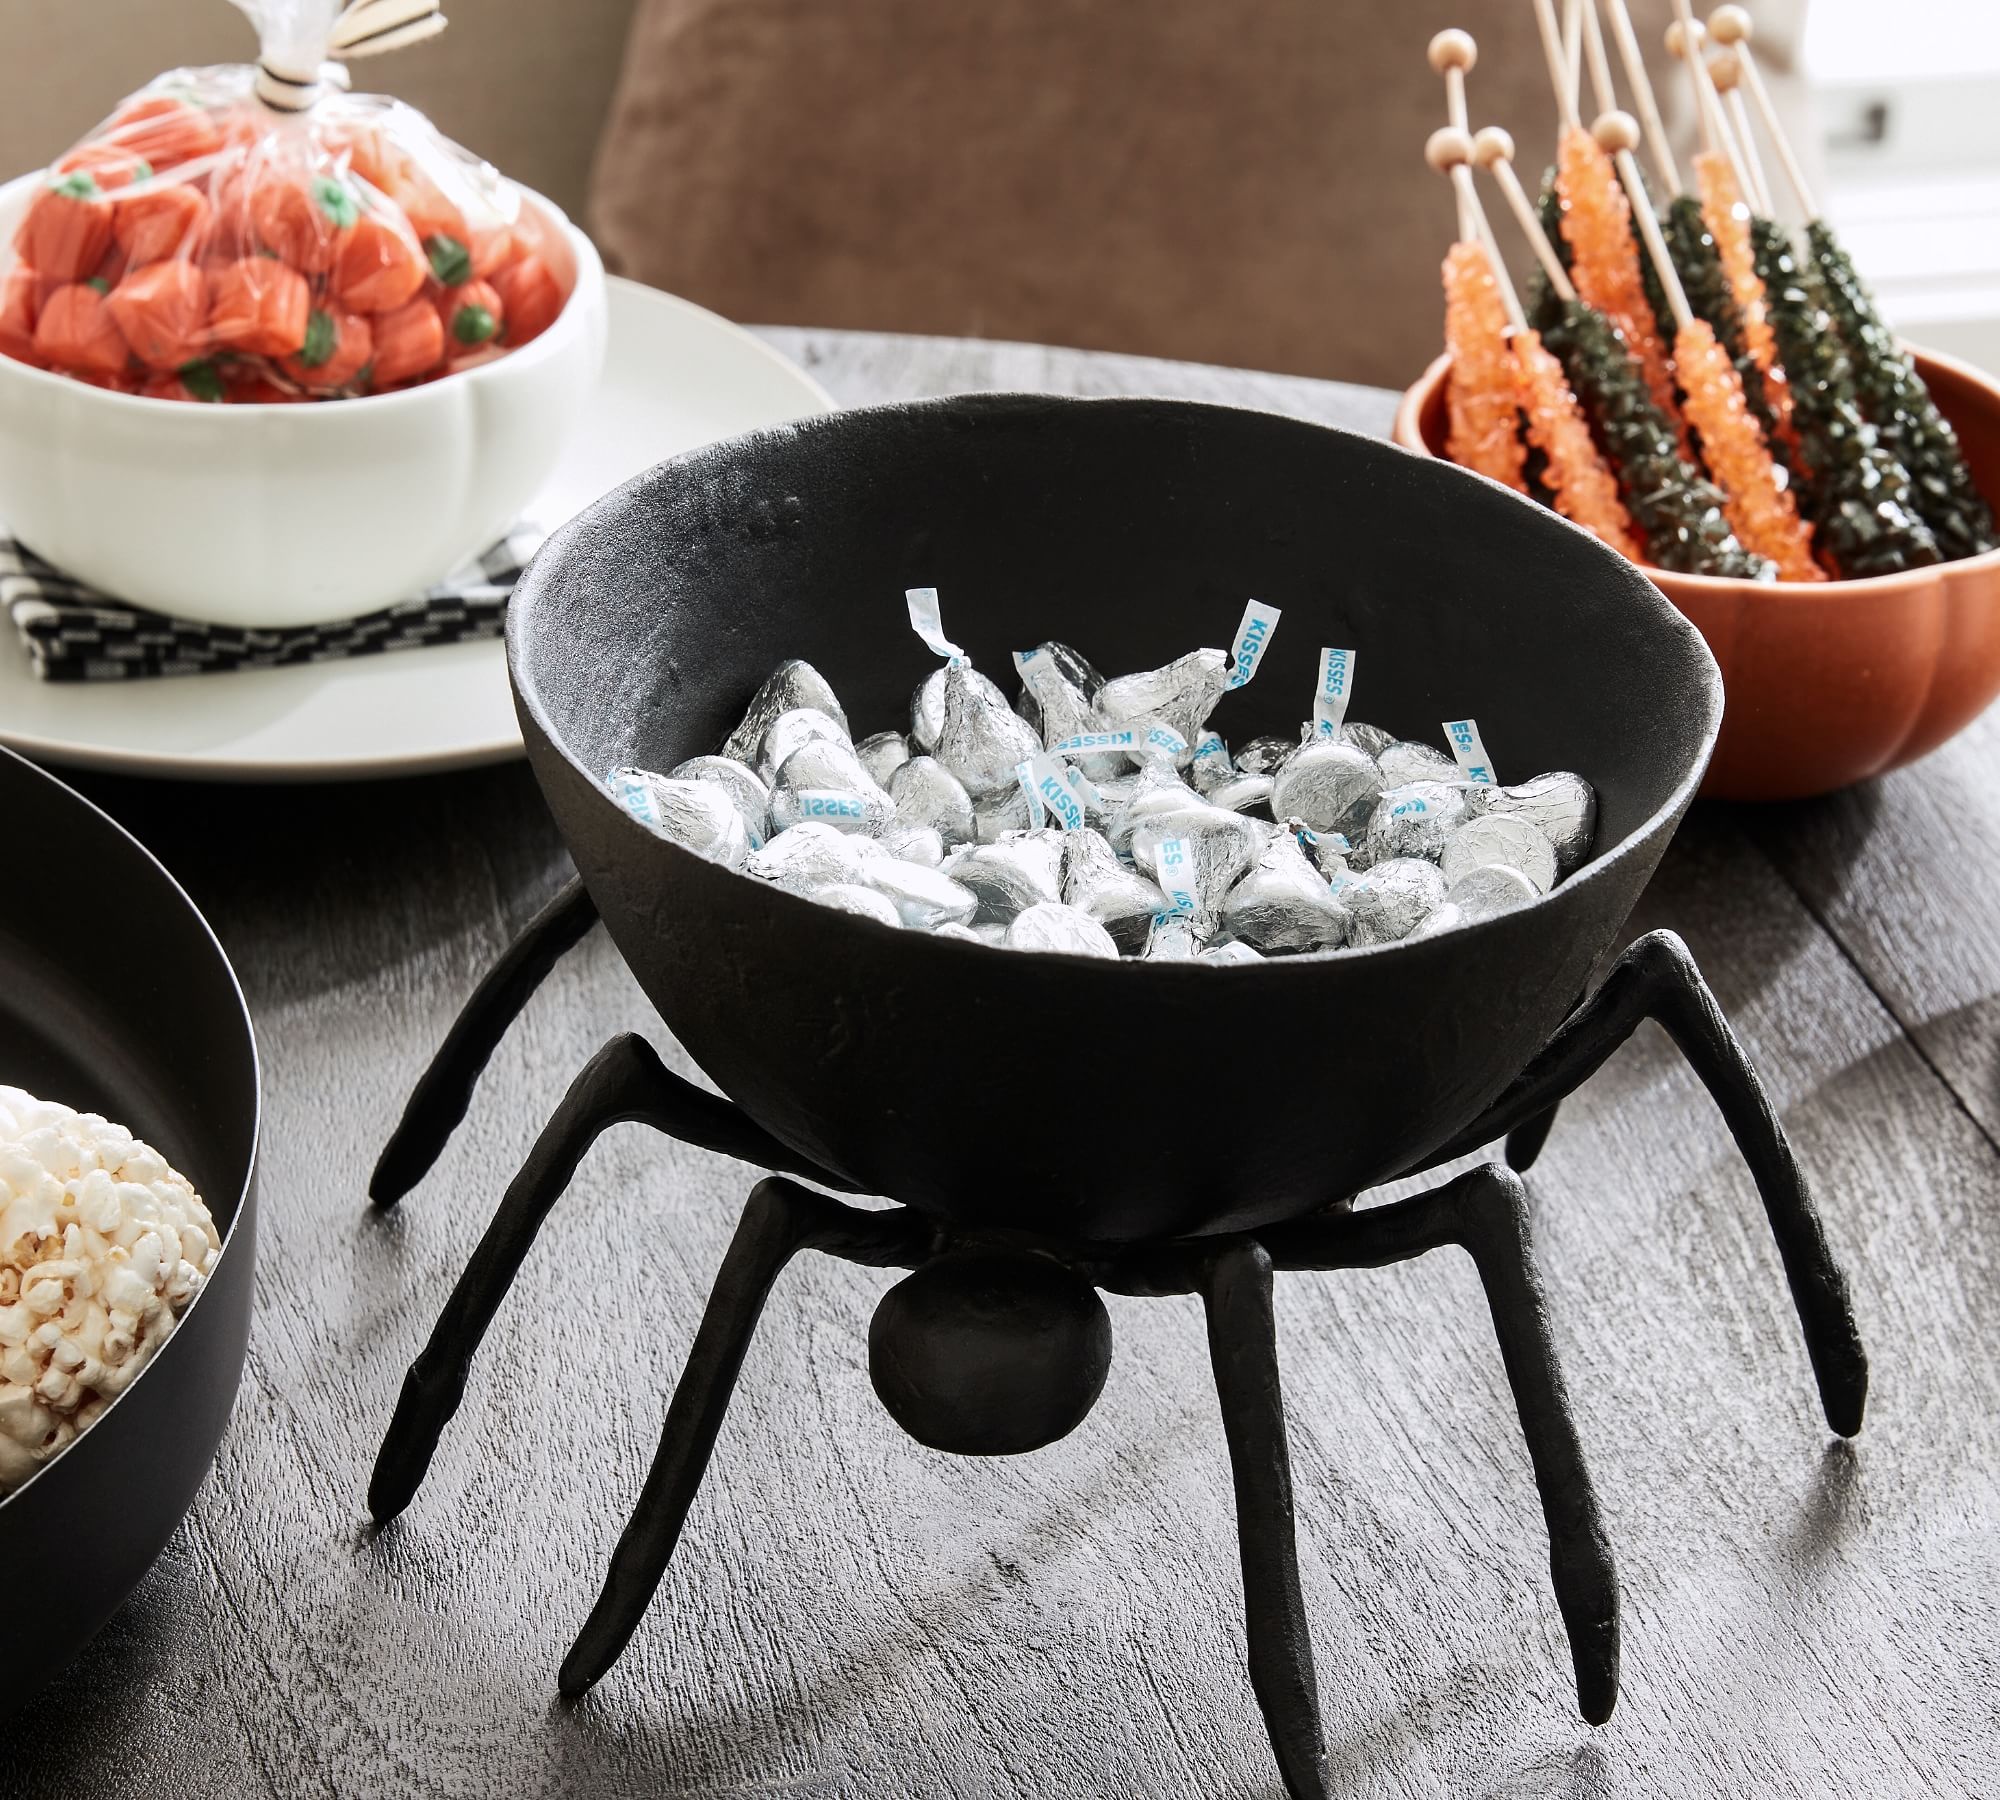 https://assets.pbimgs.com/pbimgs/ab/images/dp/wcm/202221/0685/trick-or-treat-spider-handcrafted-metal-candy-bowl-xl.jpg